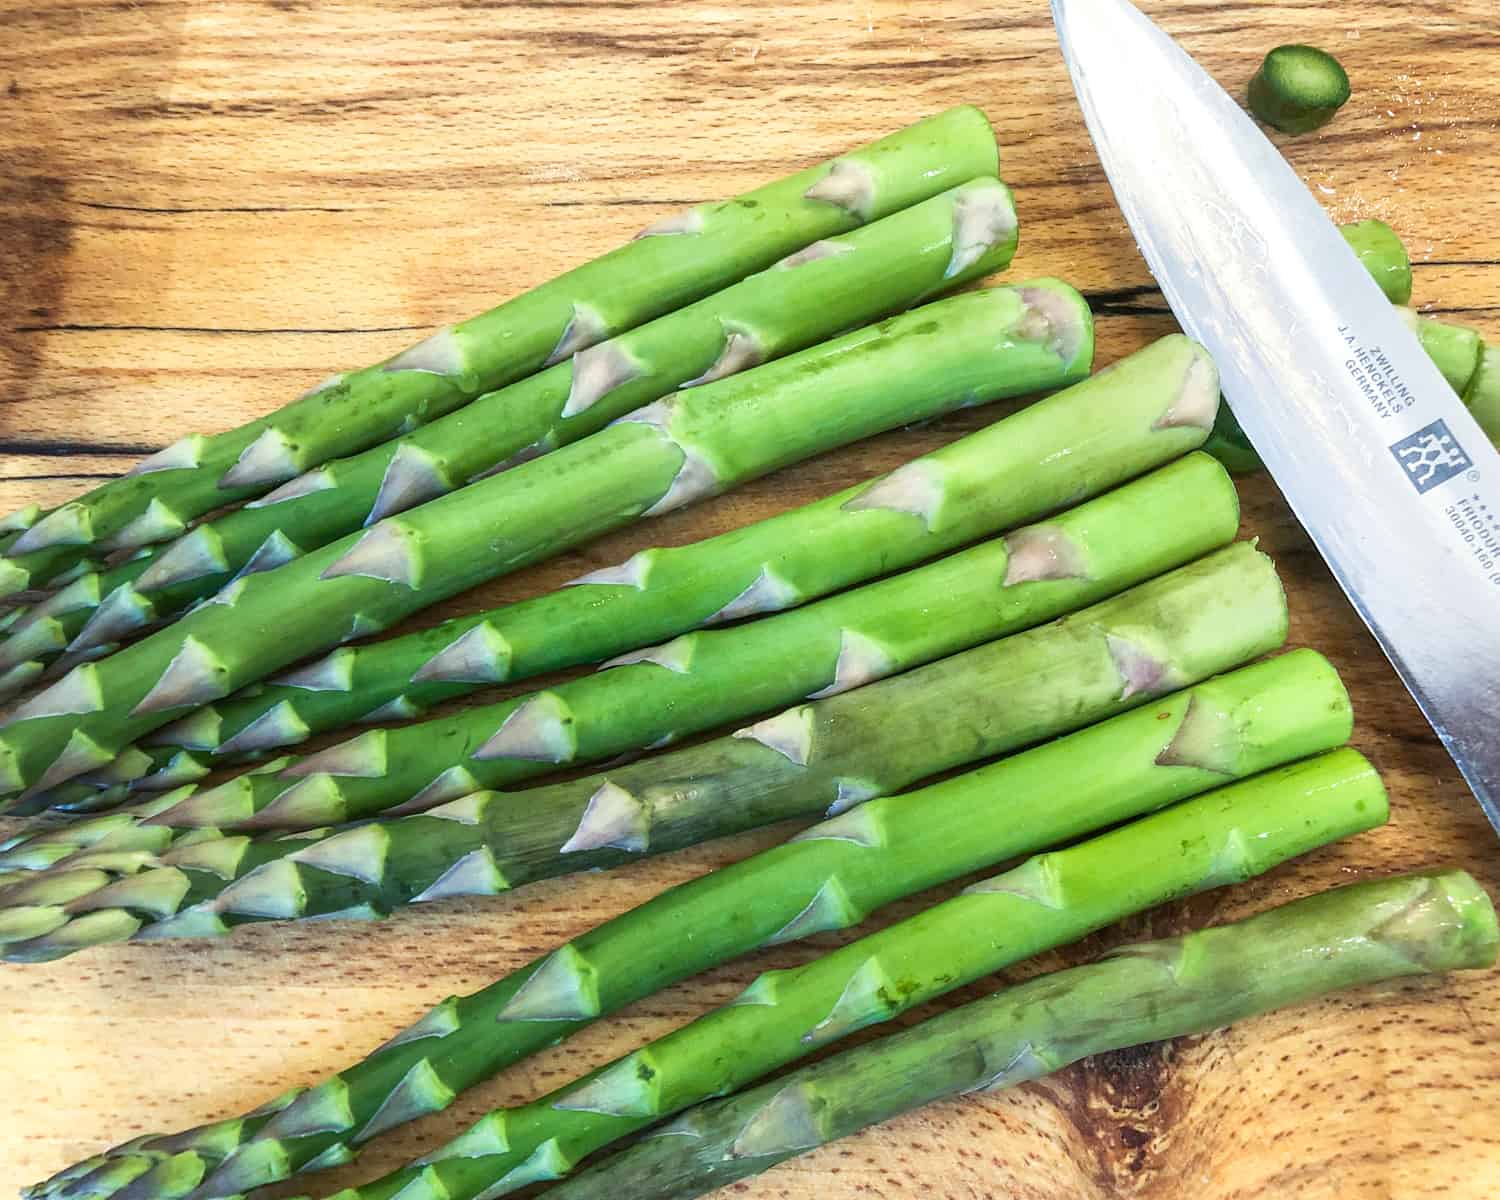 Trimming asparagus spears on a wooden board.